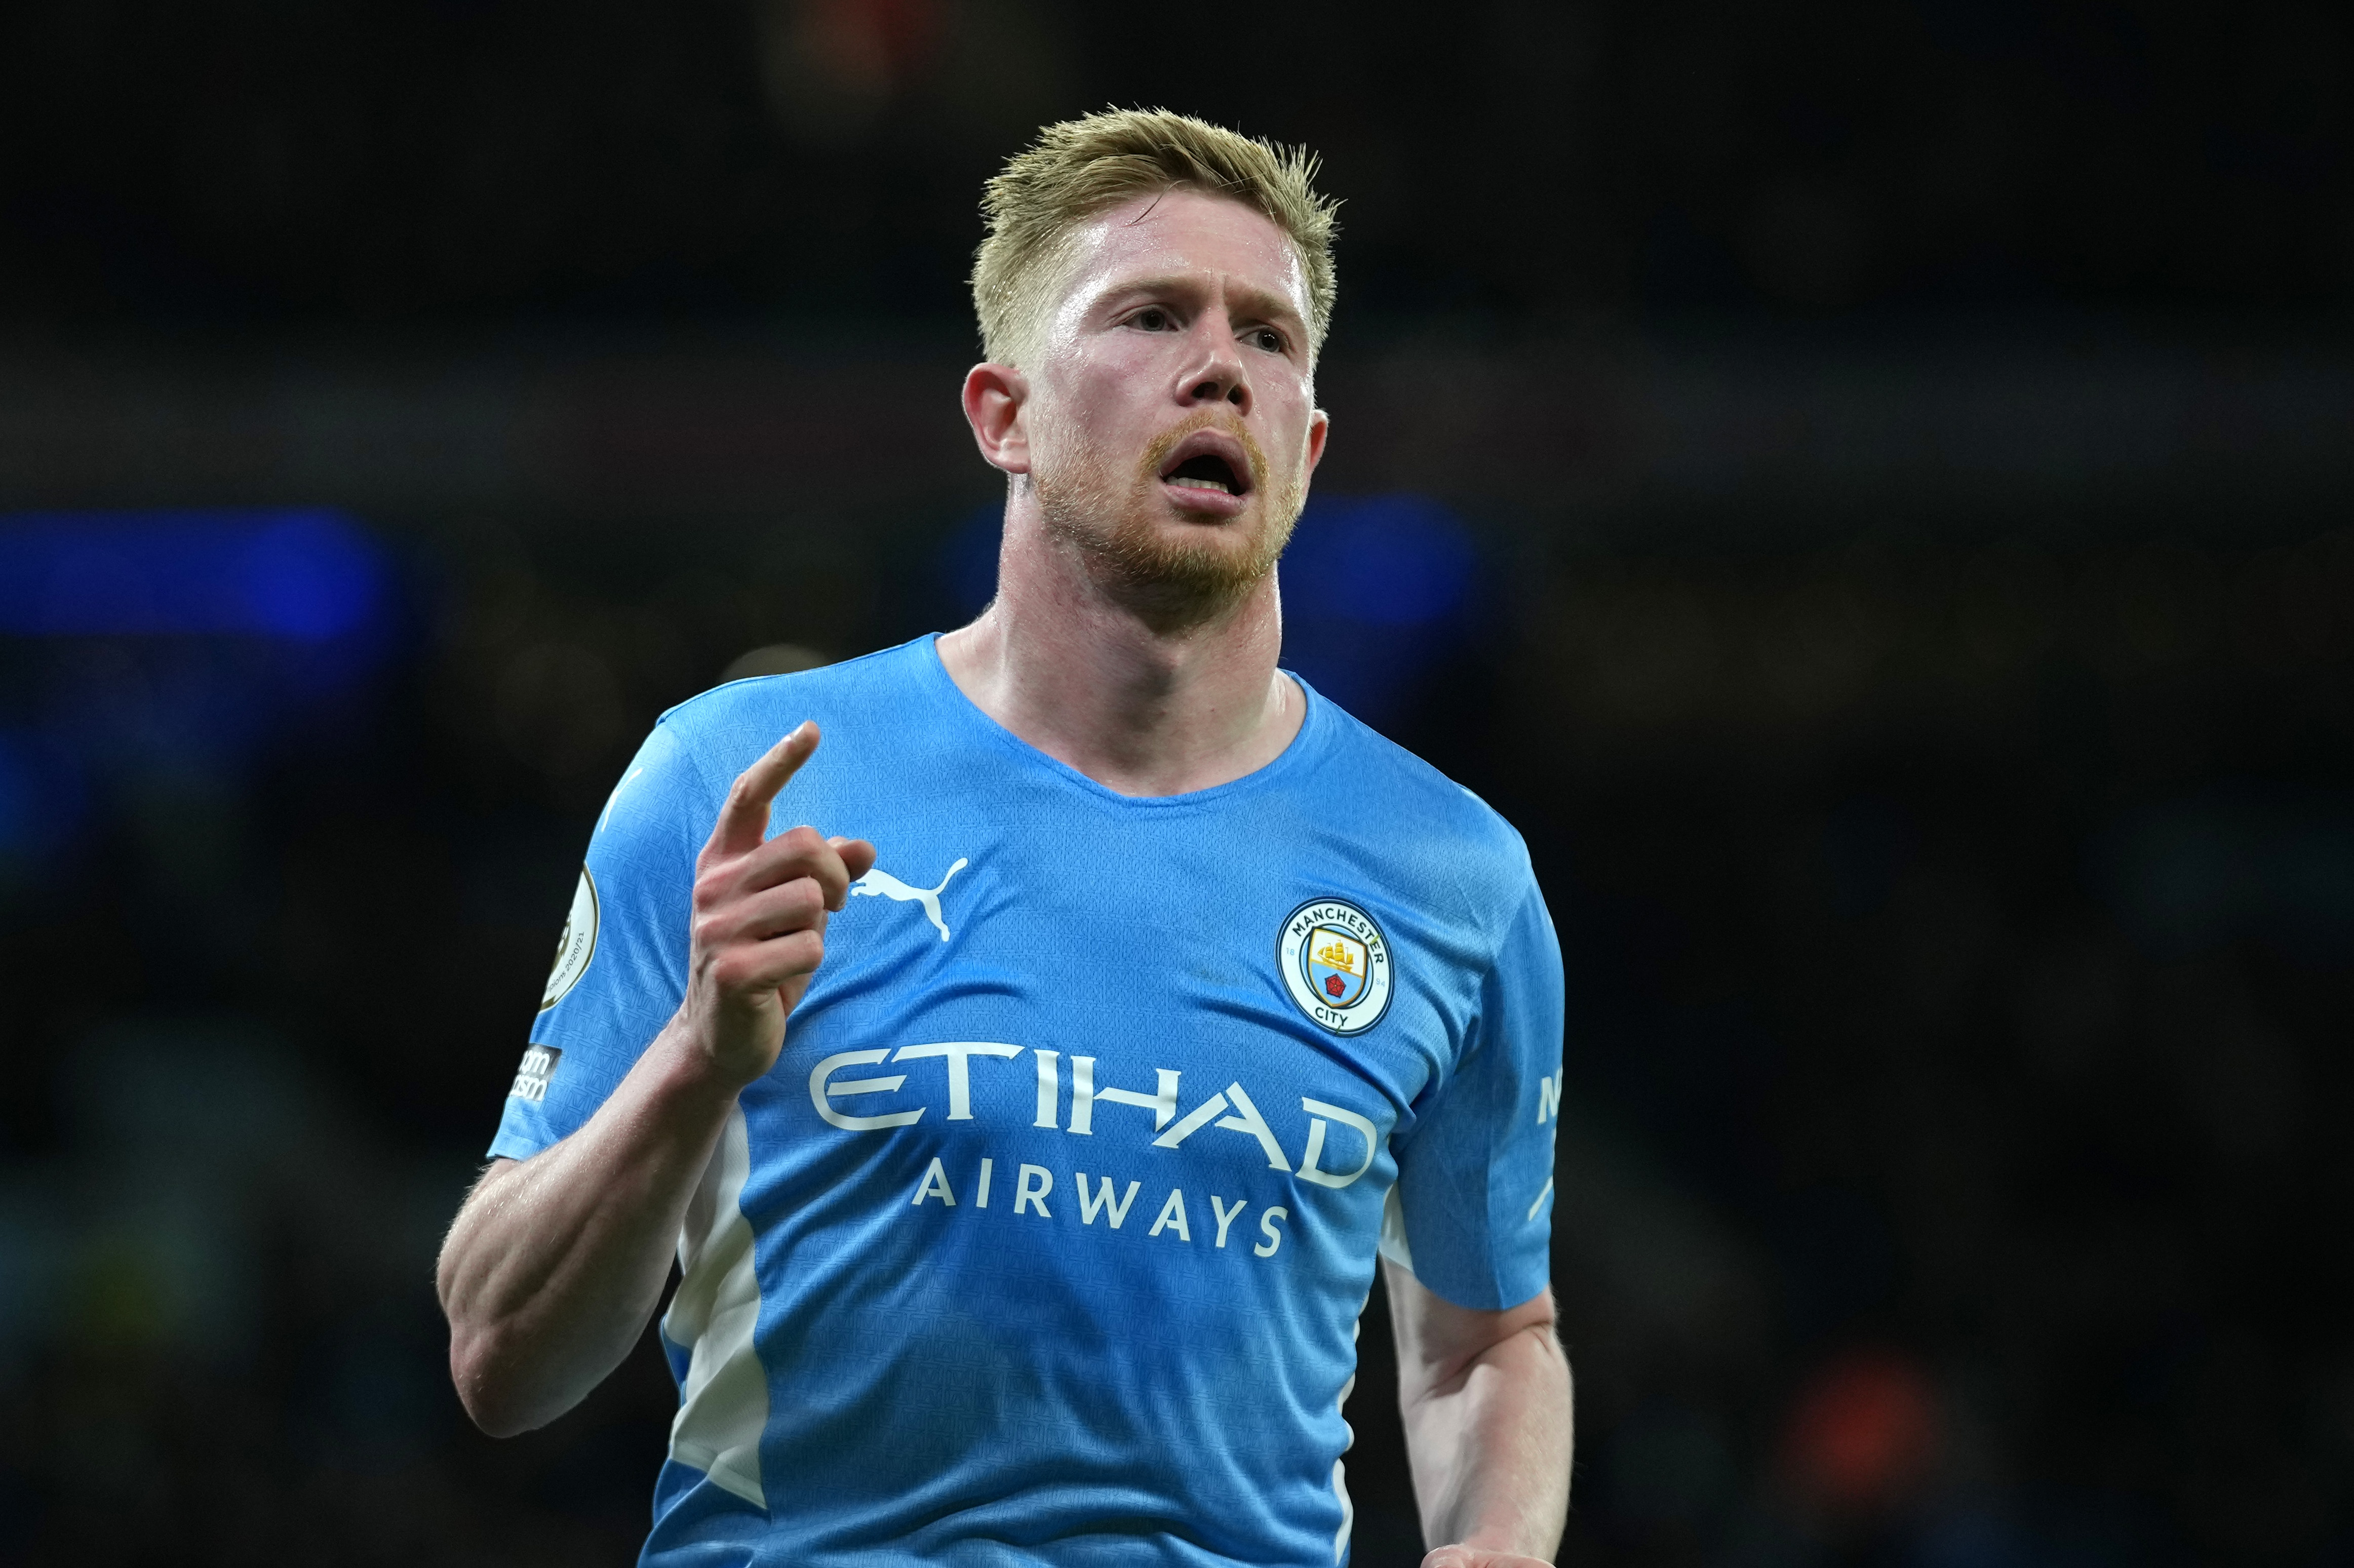 Kevin De Bruyne has seemingly returned to his best after returning from injury